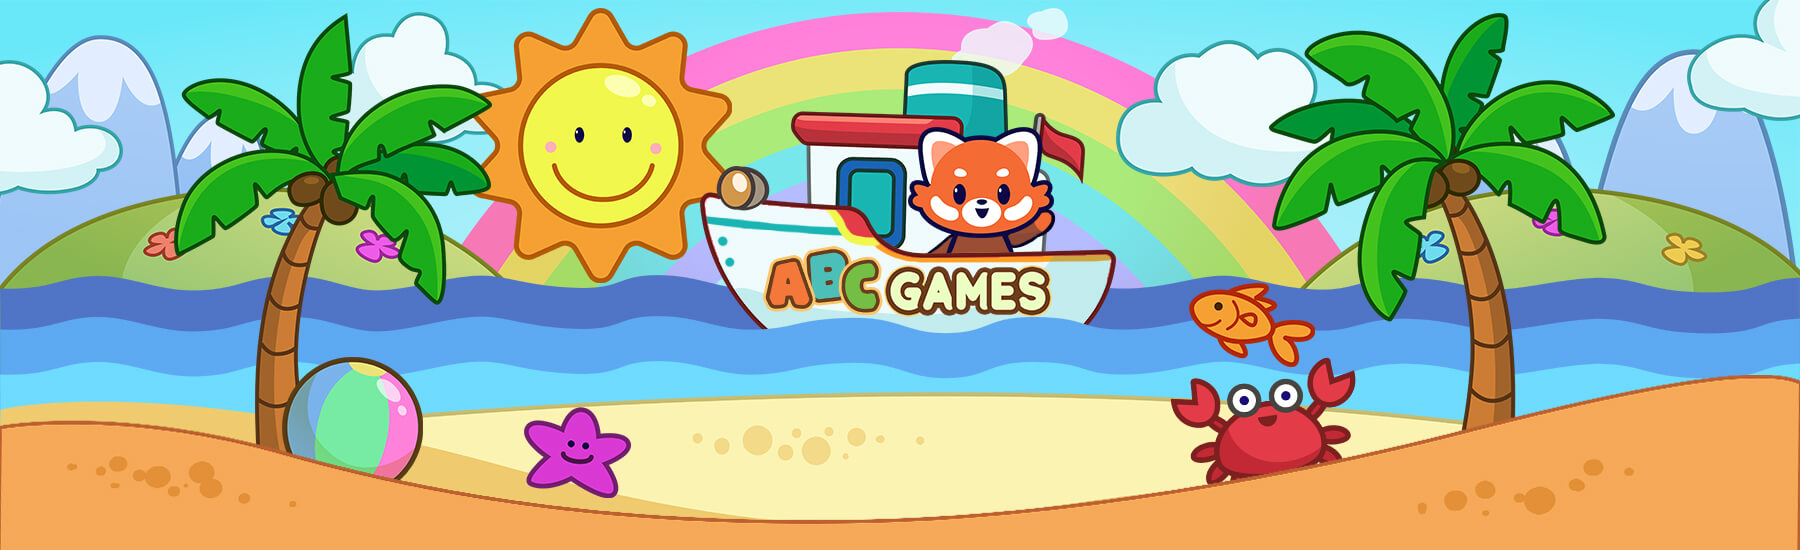 Banner ABC Games Day